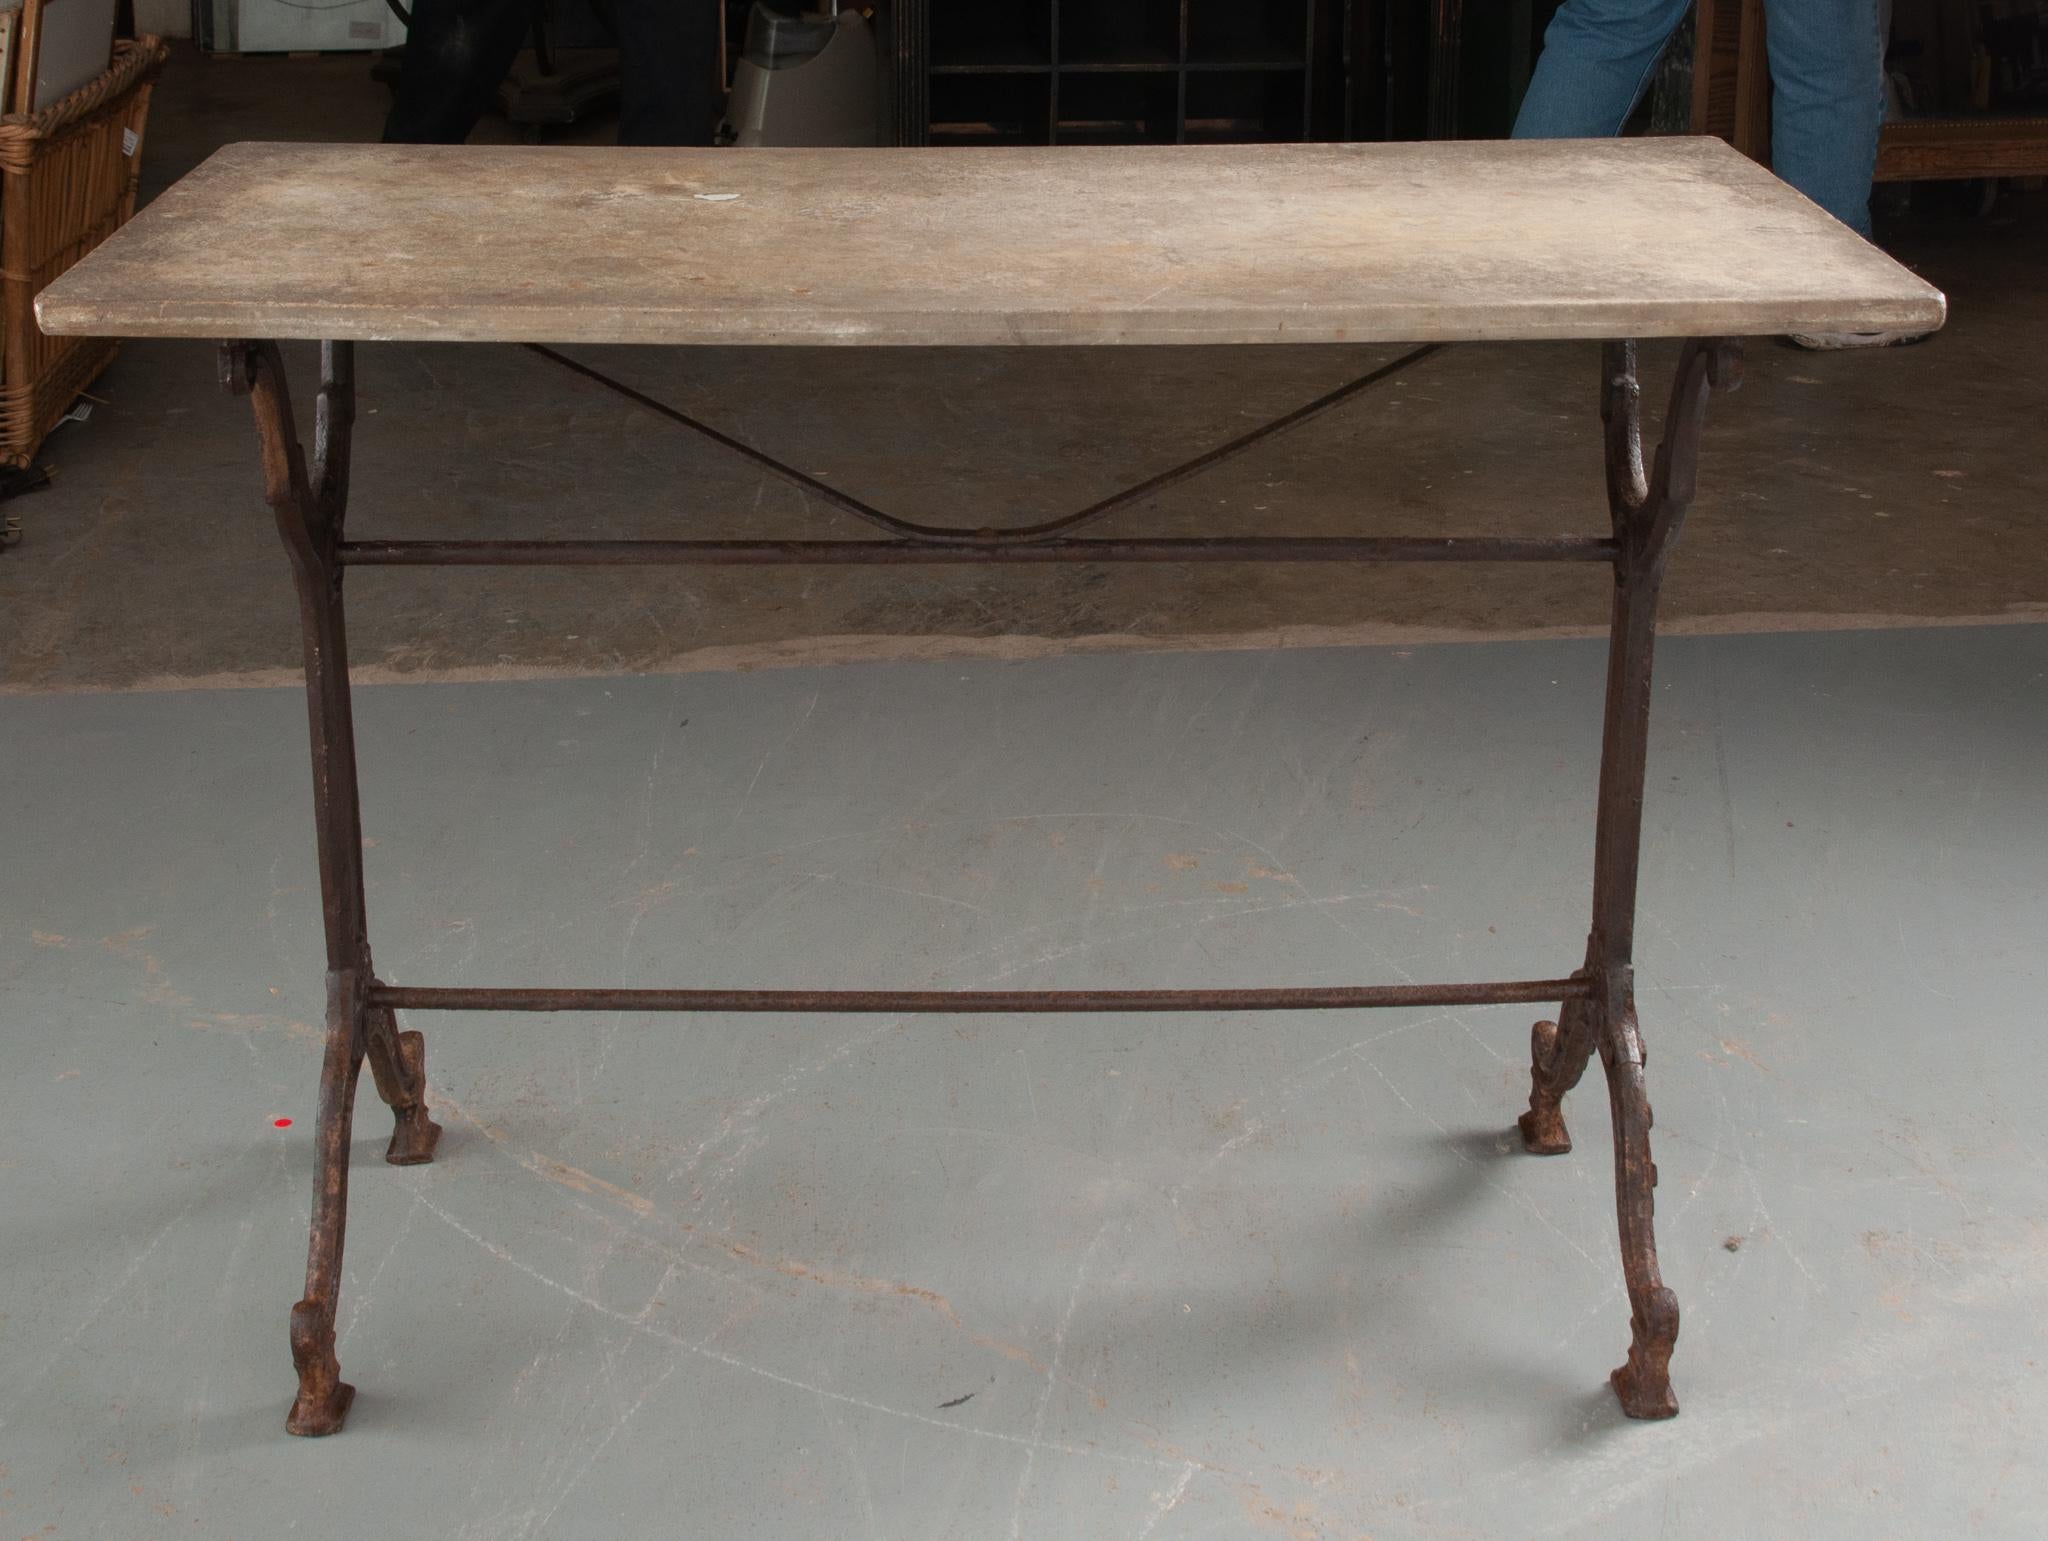 This rustic concrete top garden table was made in France. Weathered over the years, the top is in antique condition. The cast iron base is classically styled, with fashioned upright supports, linked by two iron stretcher braces. The worn iron